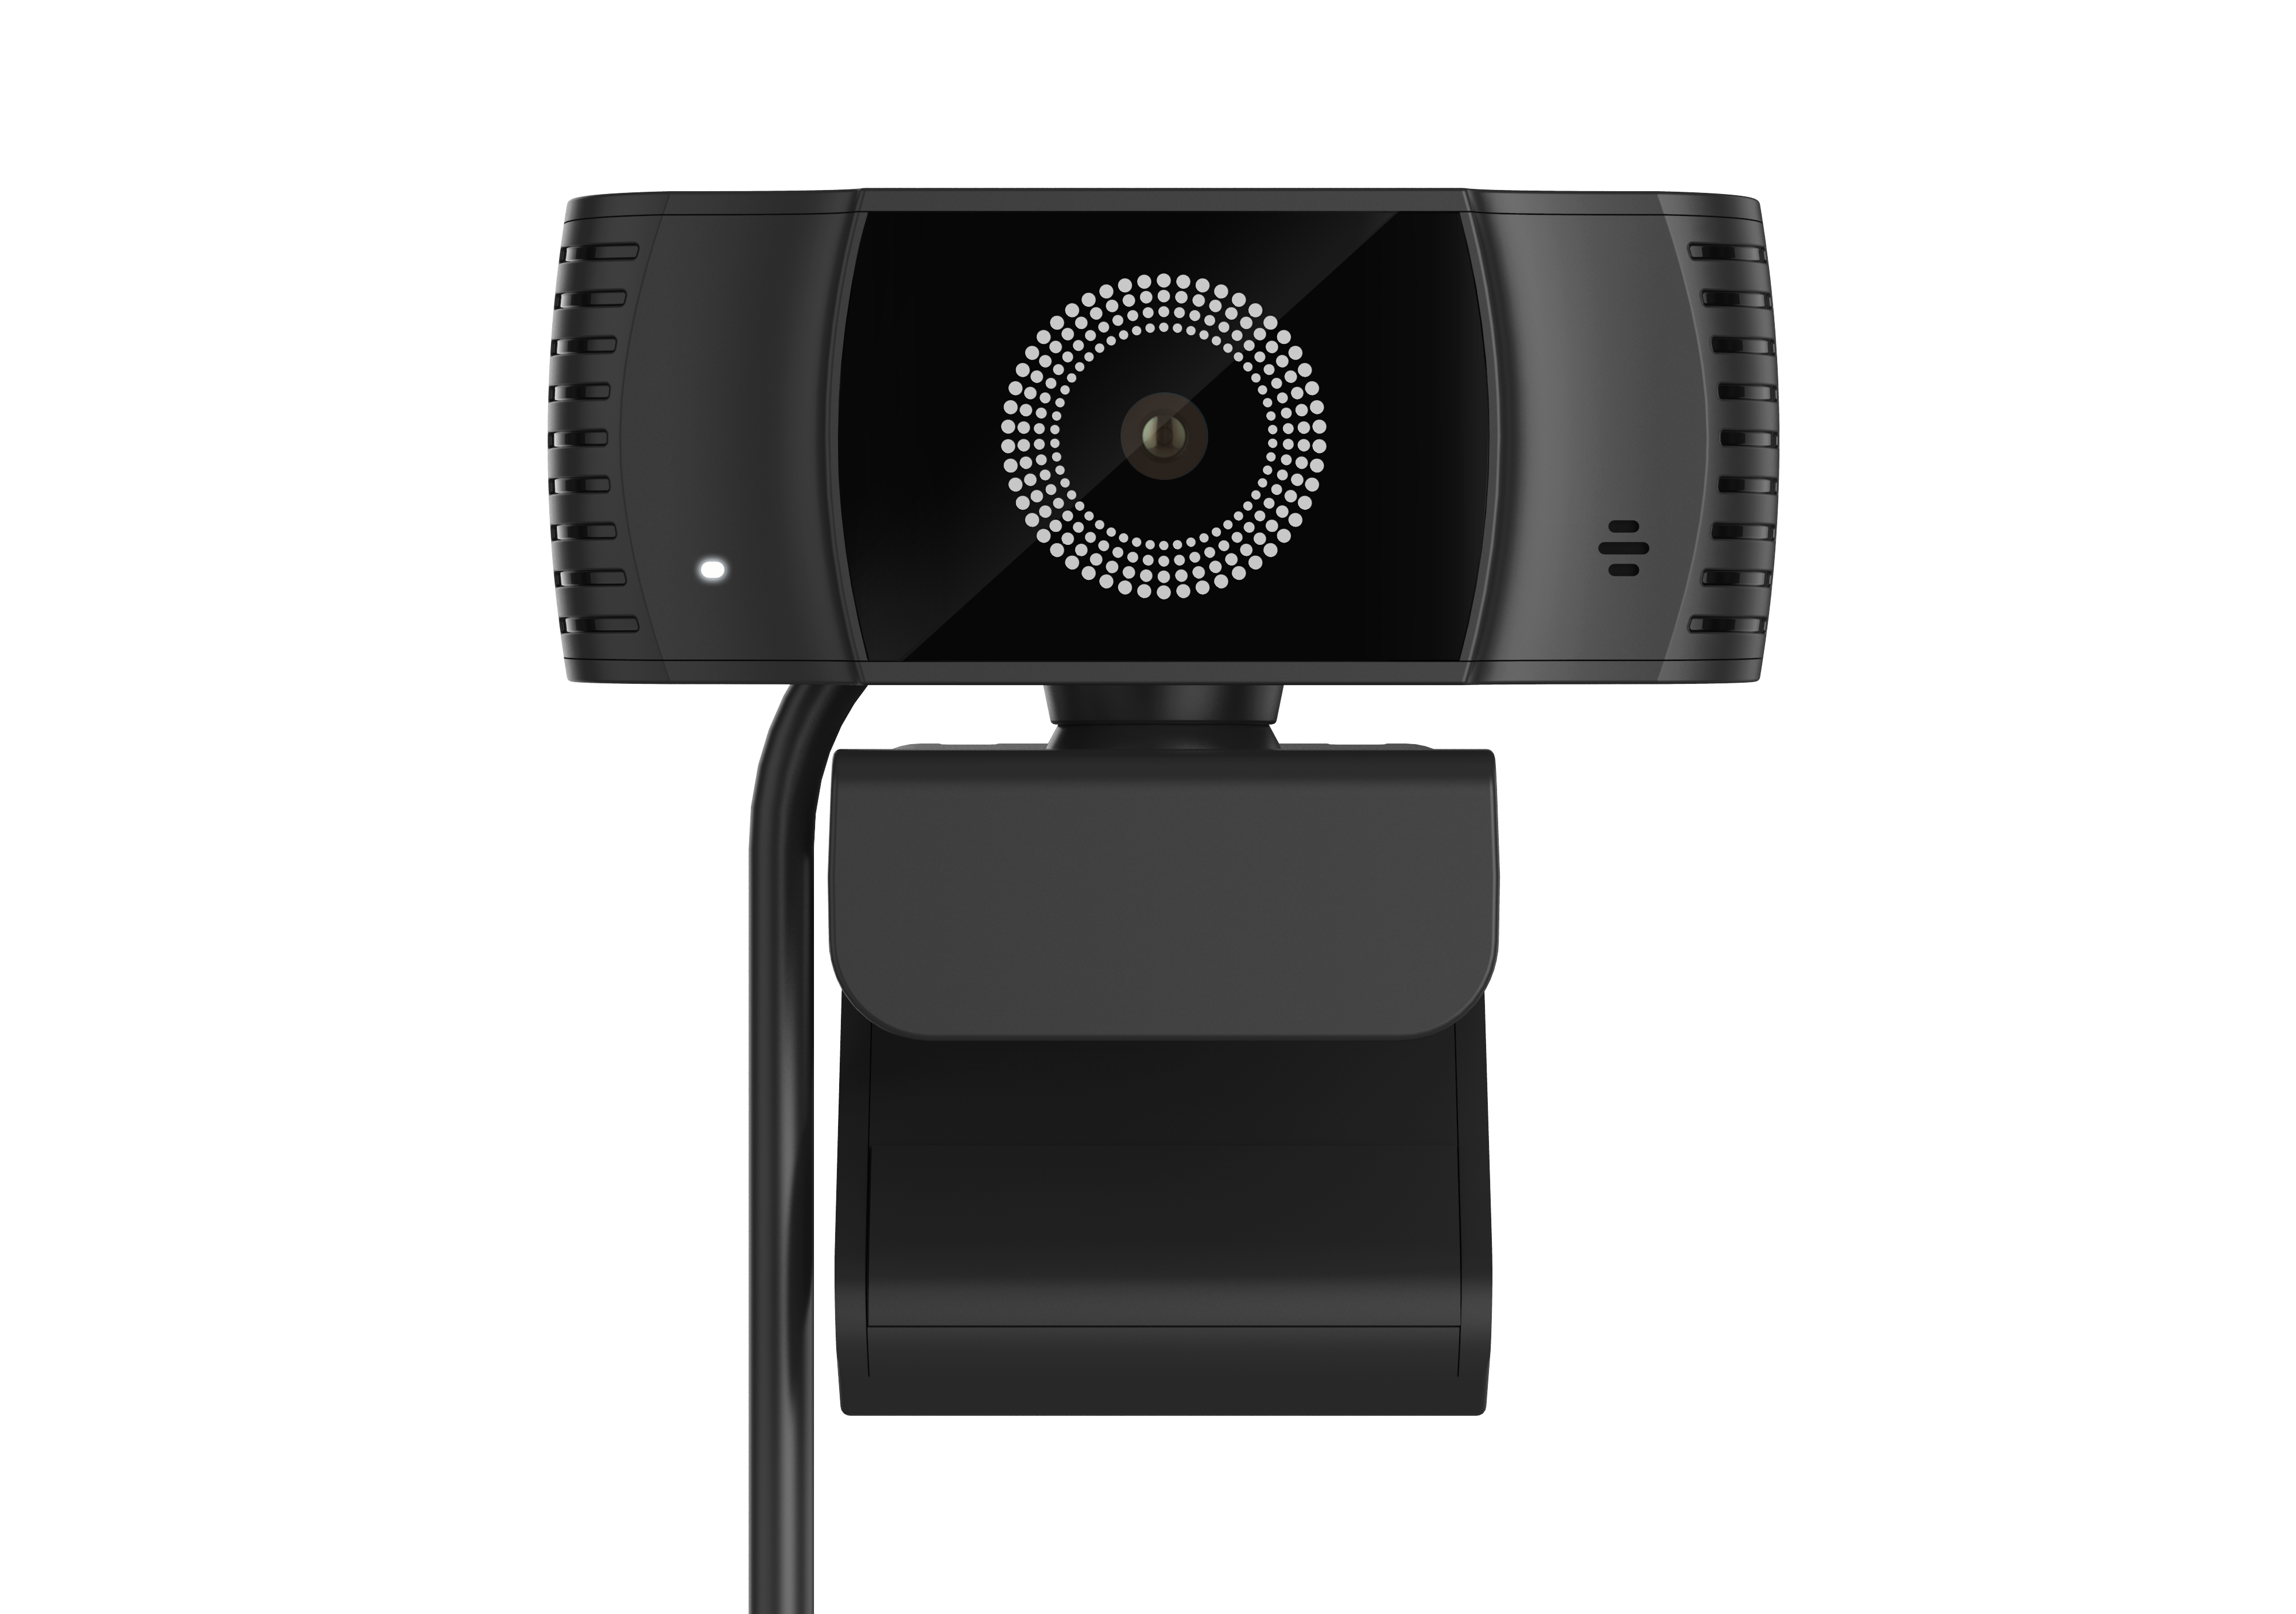 Automatic focus of the computer camera